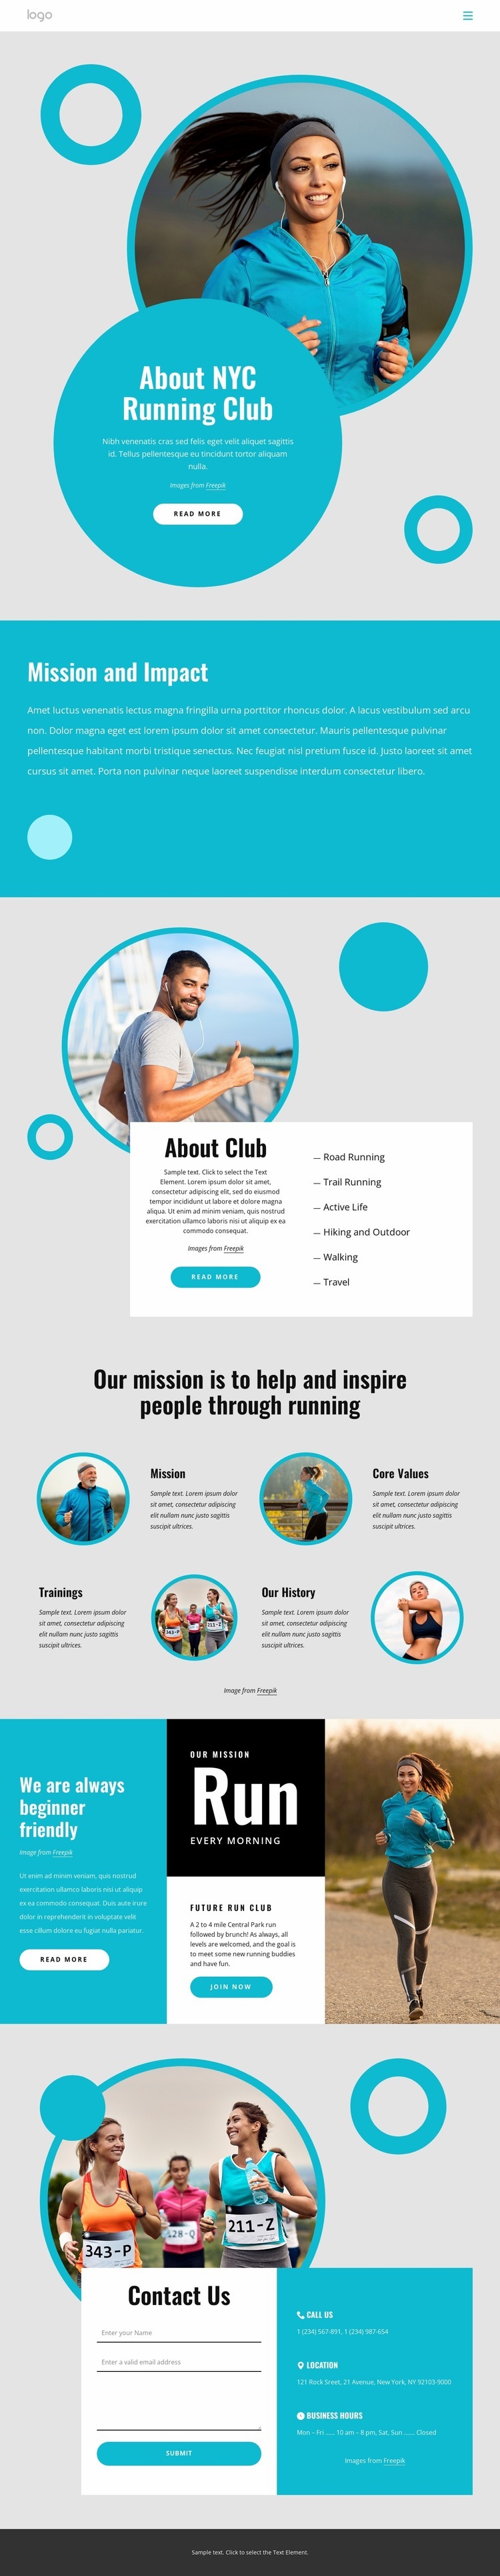 About NYC running club Web Page Design